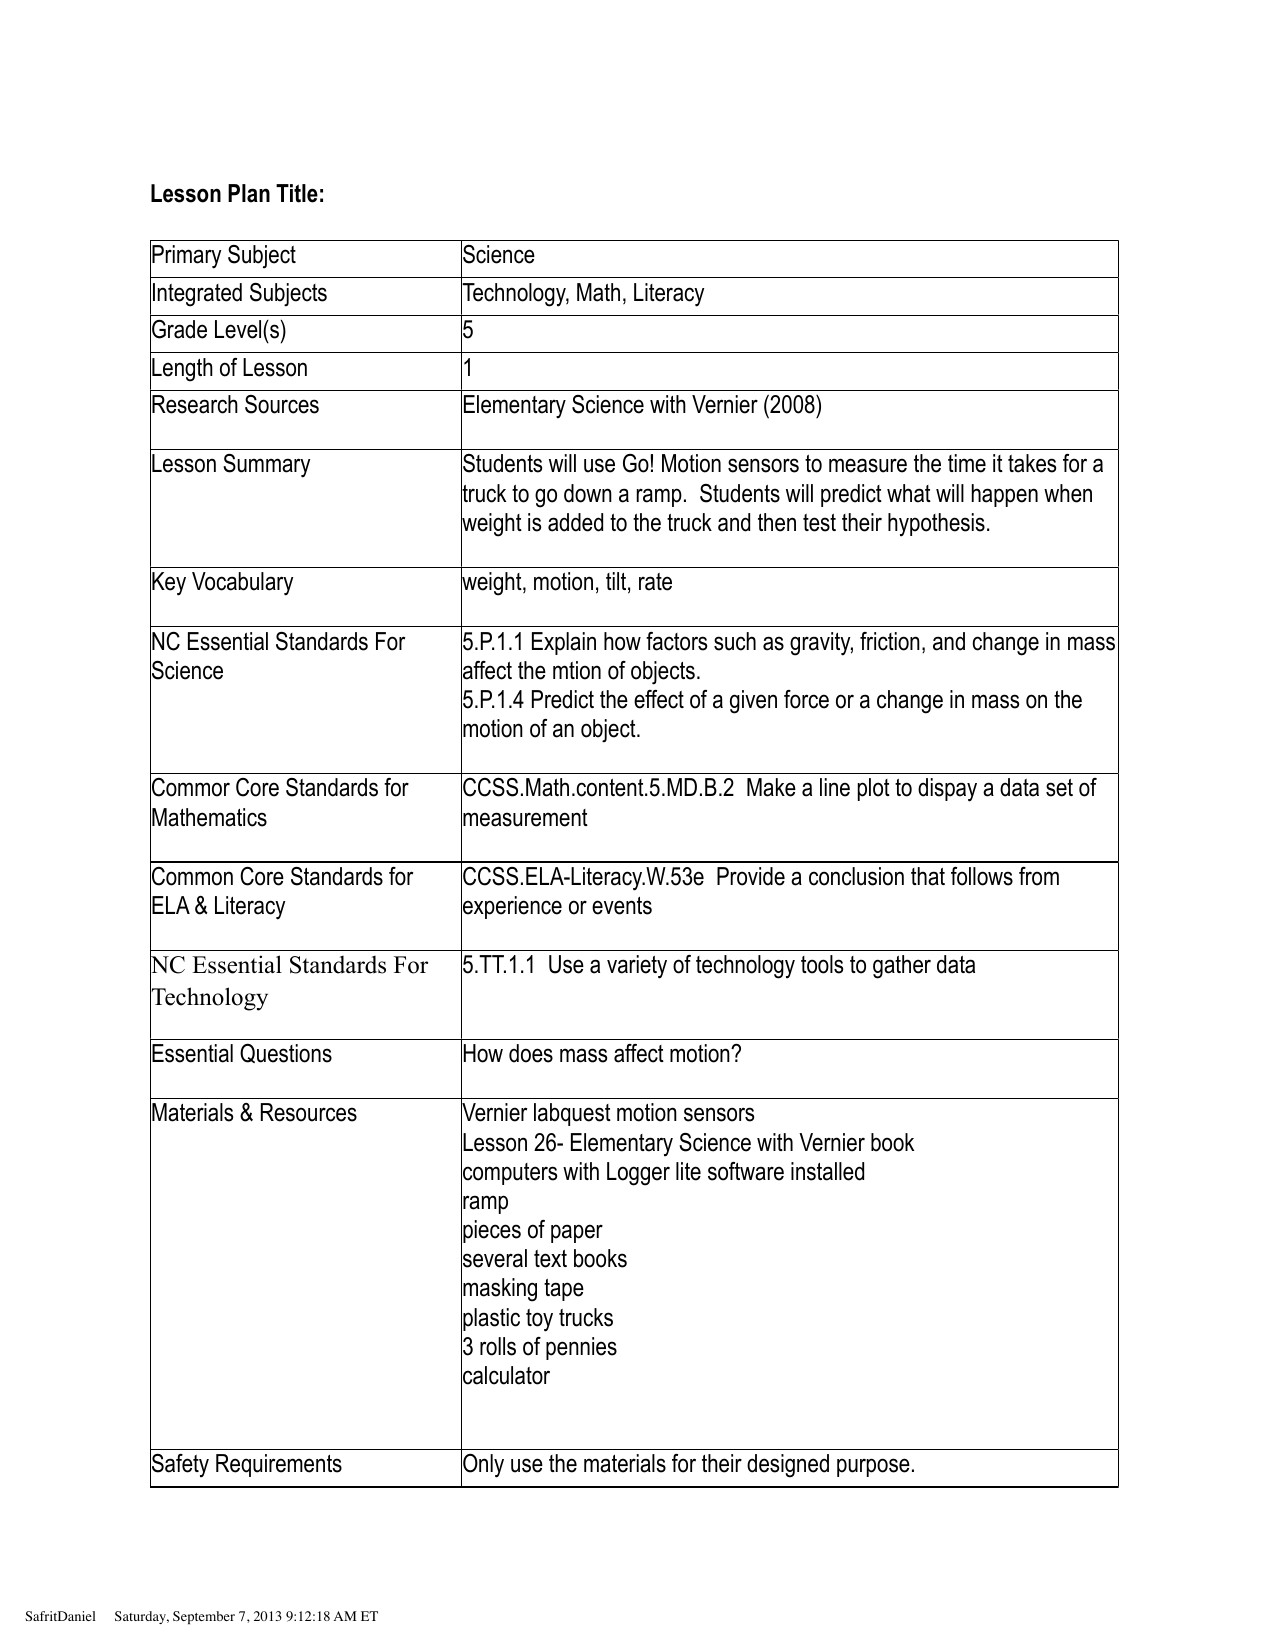 Lesson Plan for Science Lesson Plan Title Primary Subject Science Integrated Subjects